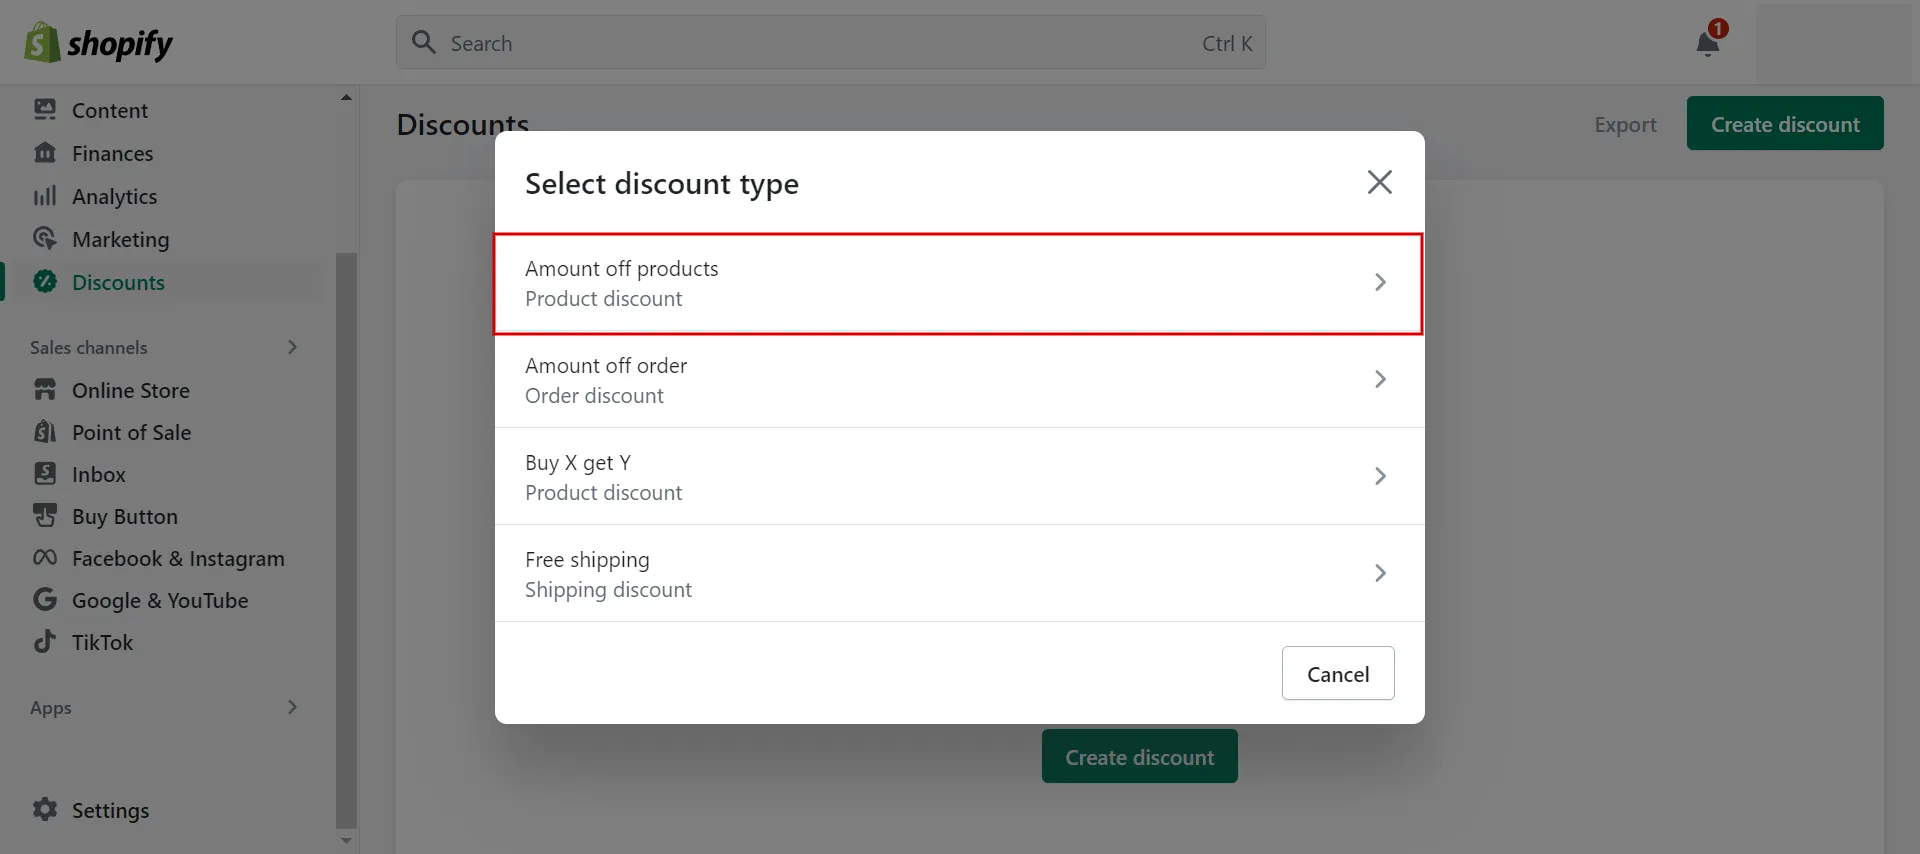 Select the amount off products option